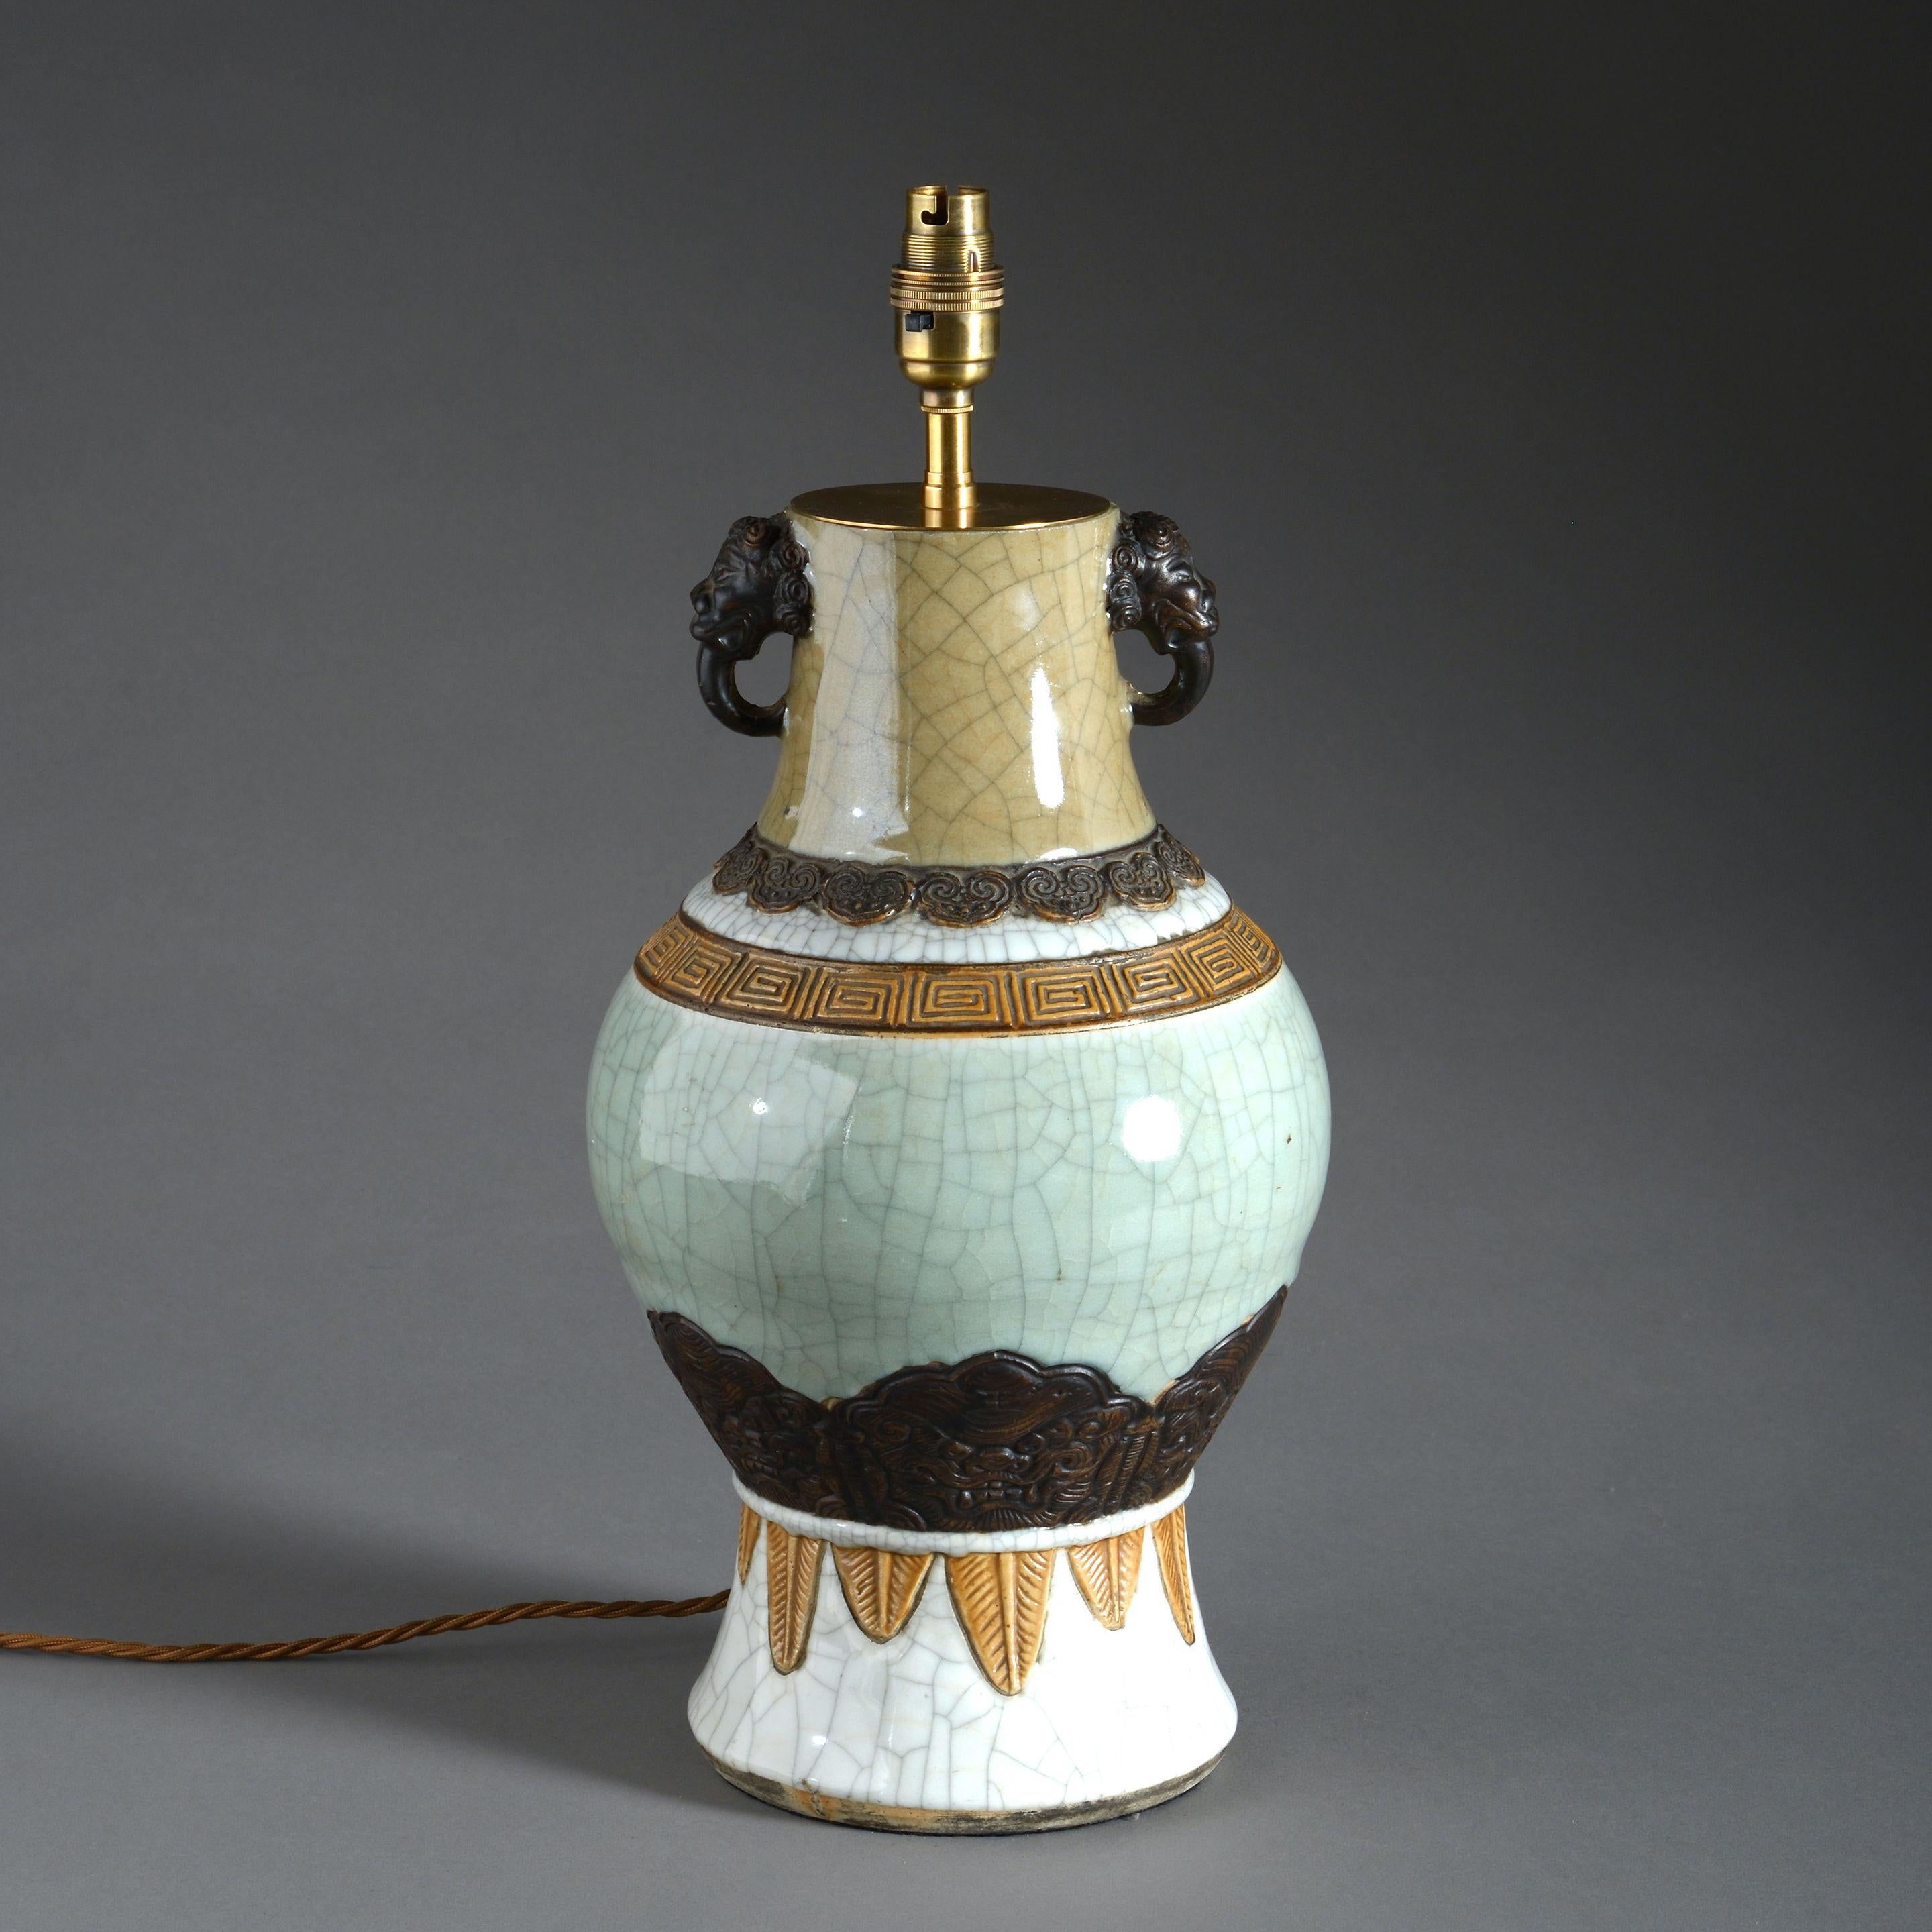 A mid-19th century vase of good scale, the body of celadon, caramel and white crackle glazes, having bronzed elephant head handles about the neck. 

Qing Dynasty.